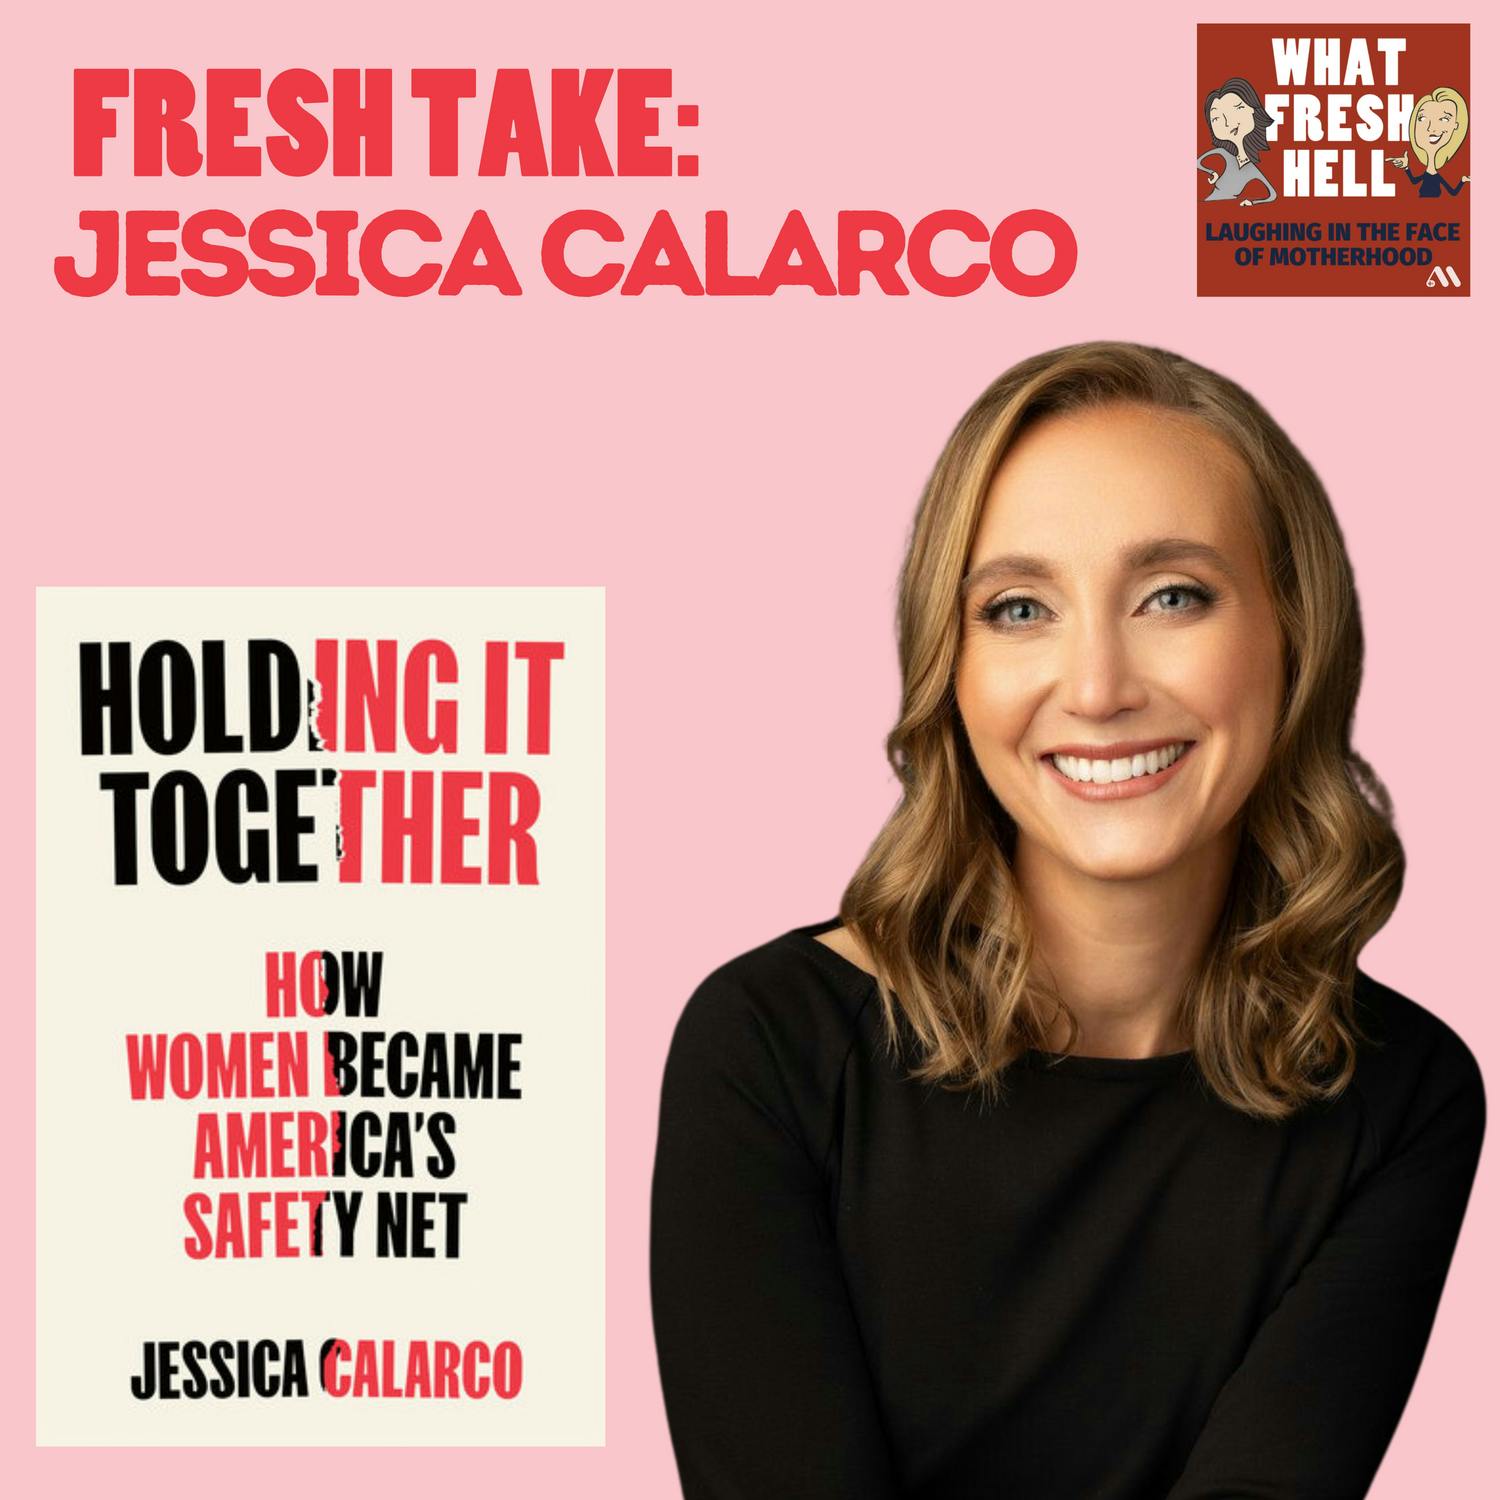 Fresh Take: Jessica Calarco on Women as America's Social Safety Net